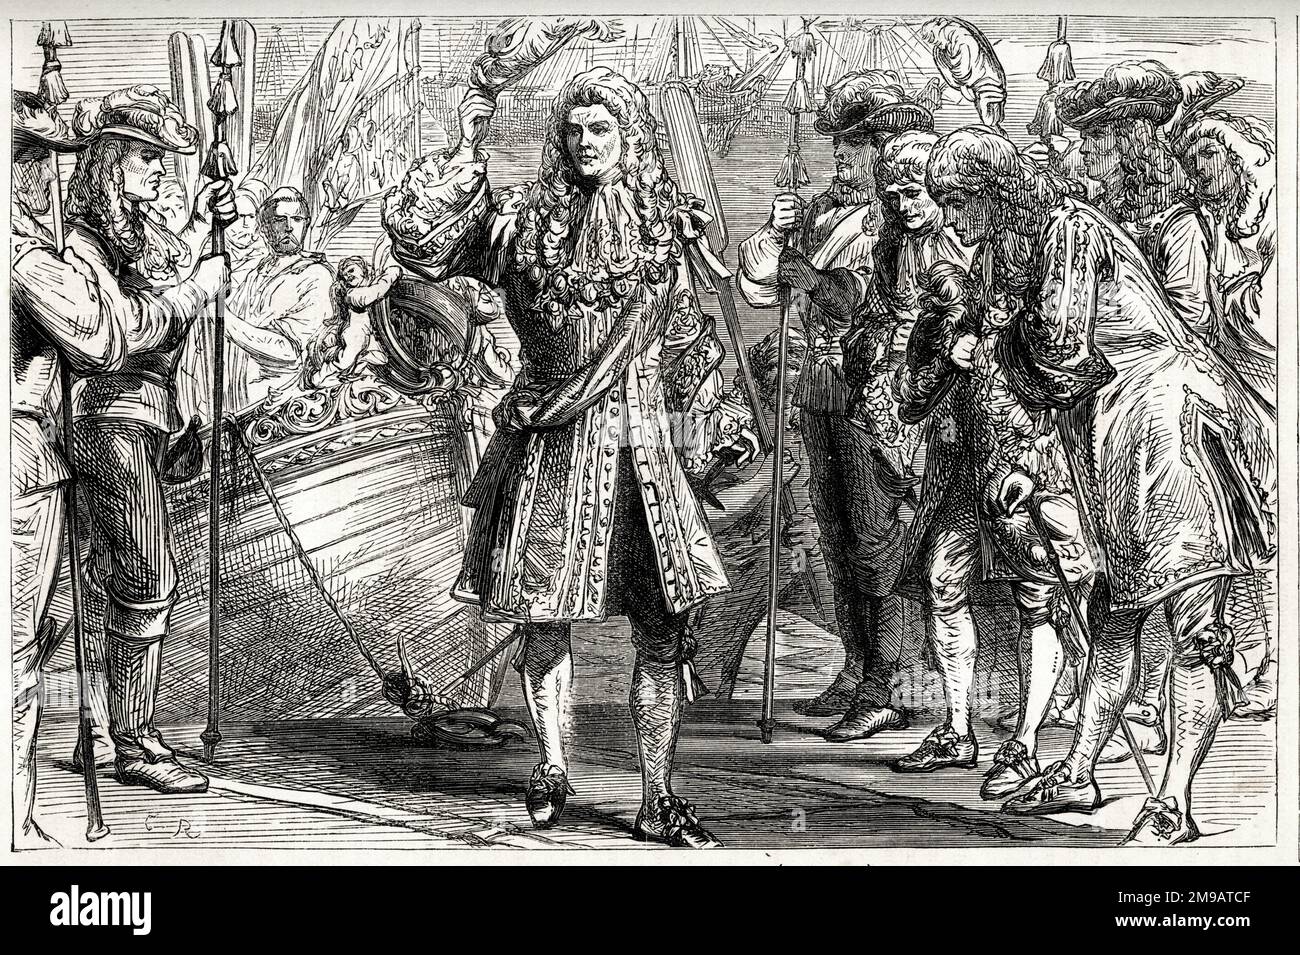 King James II landing at Kinsale, County Cork, Ireland, 12 March 1689. This marked the beginning of the Williamite War in Ireland (1689-1691), fought between Jacobite supporters of the deposed Roman Catholic King James II and followers of the Protestant King William III who replaced him. Stock Photo